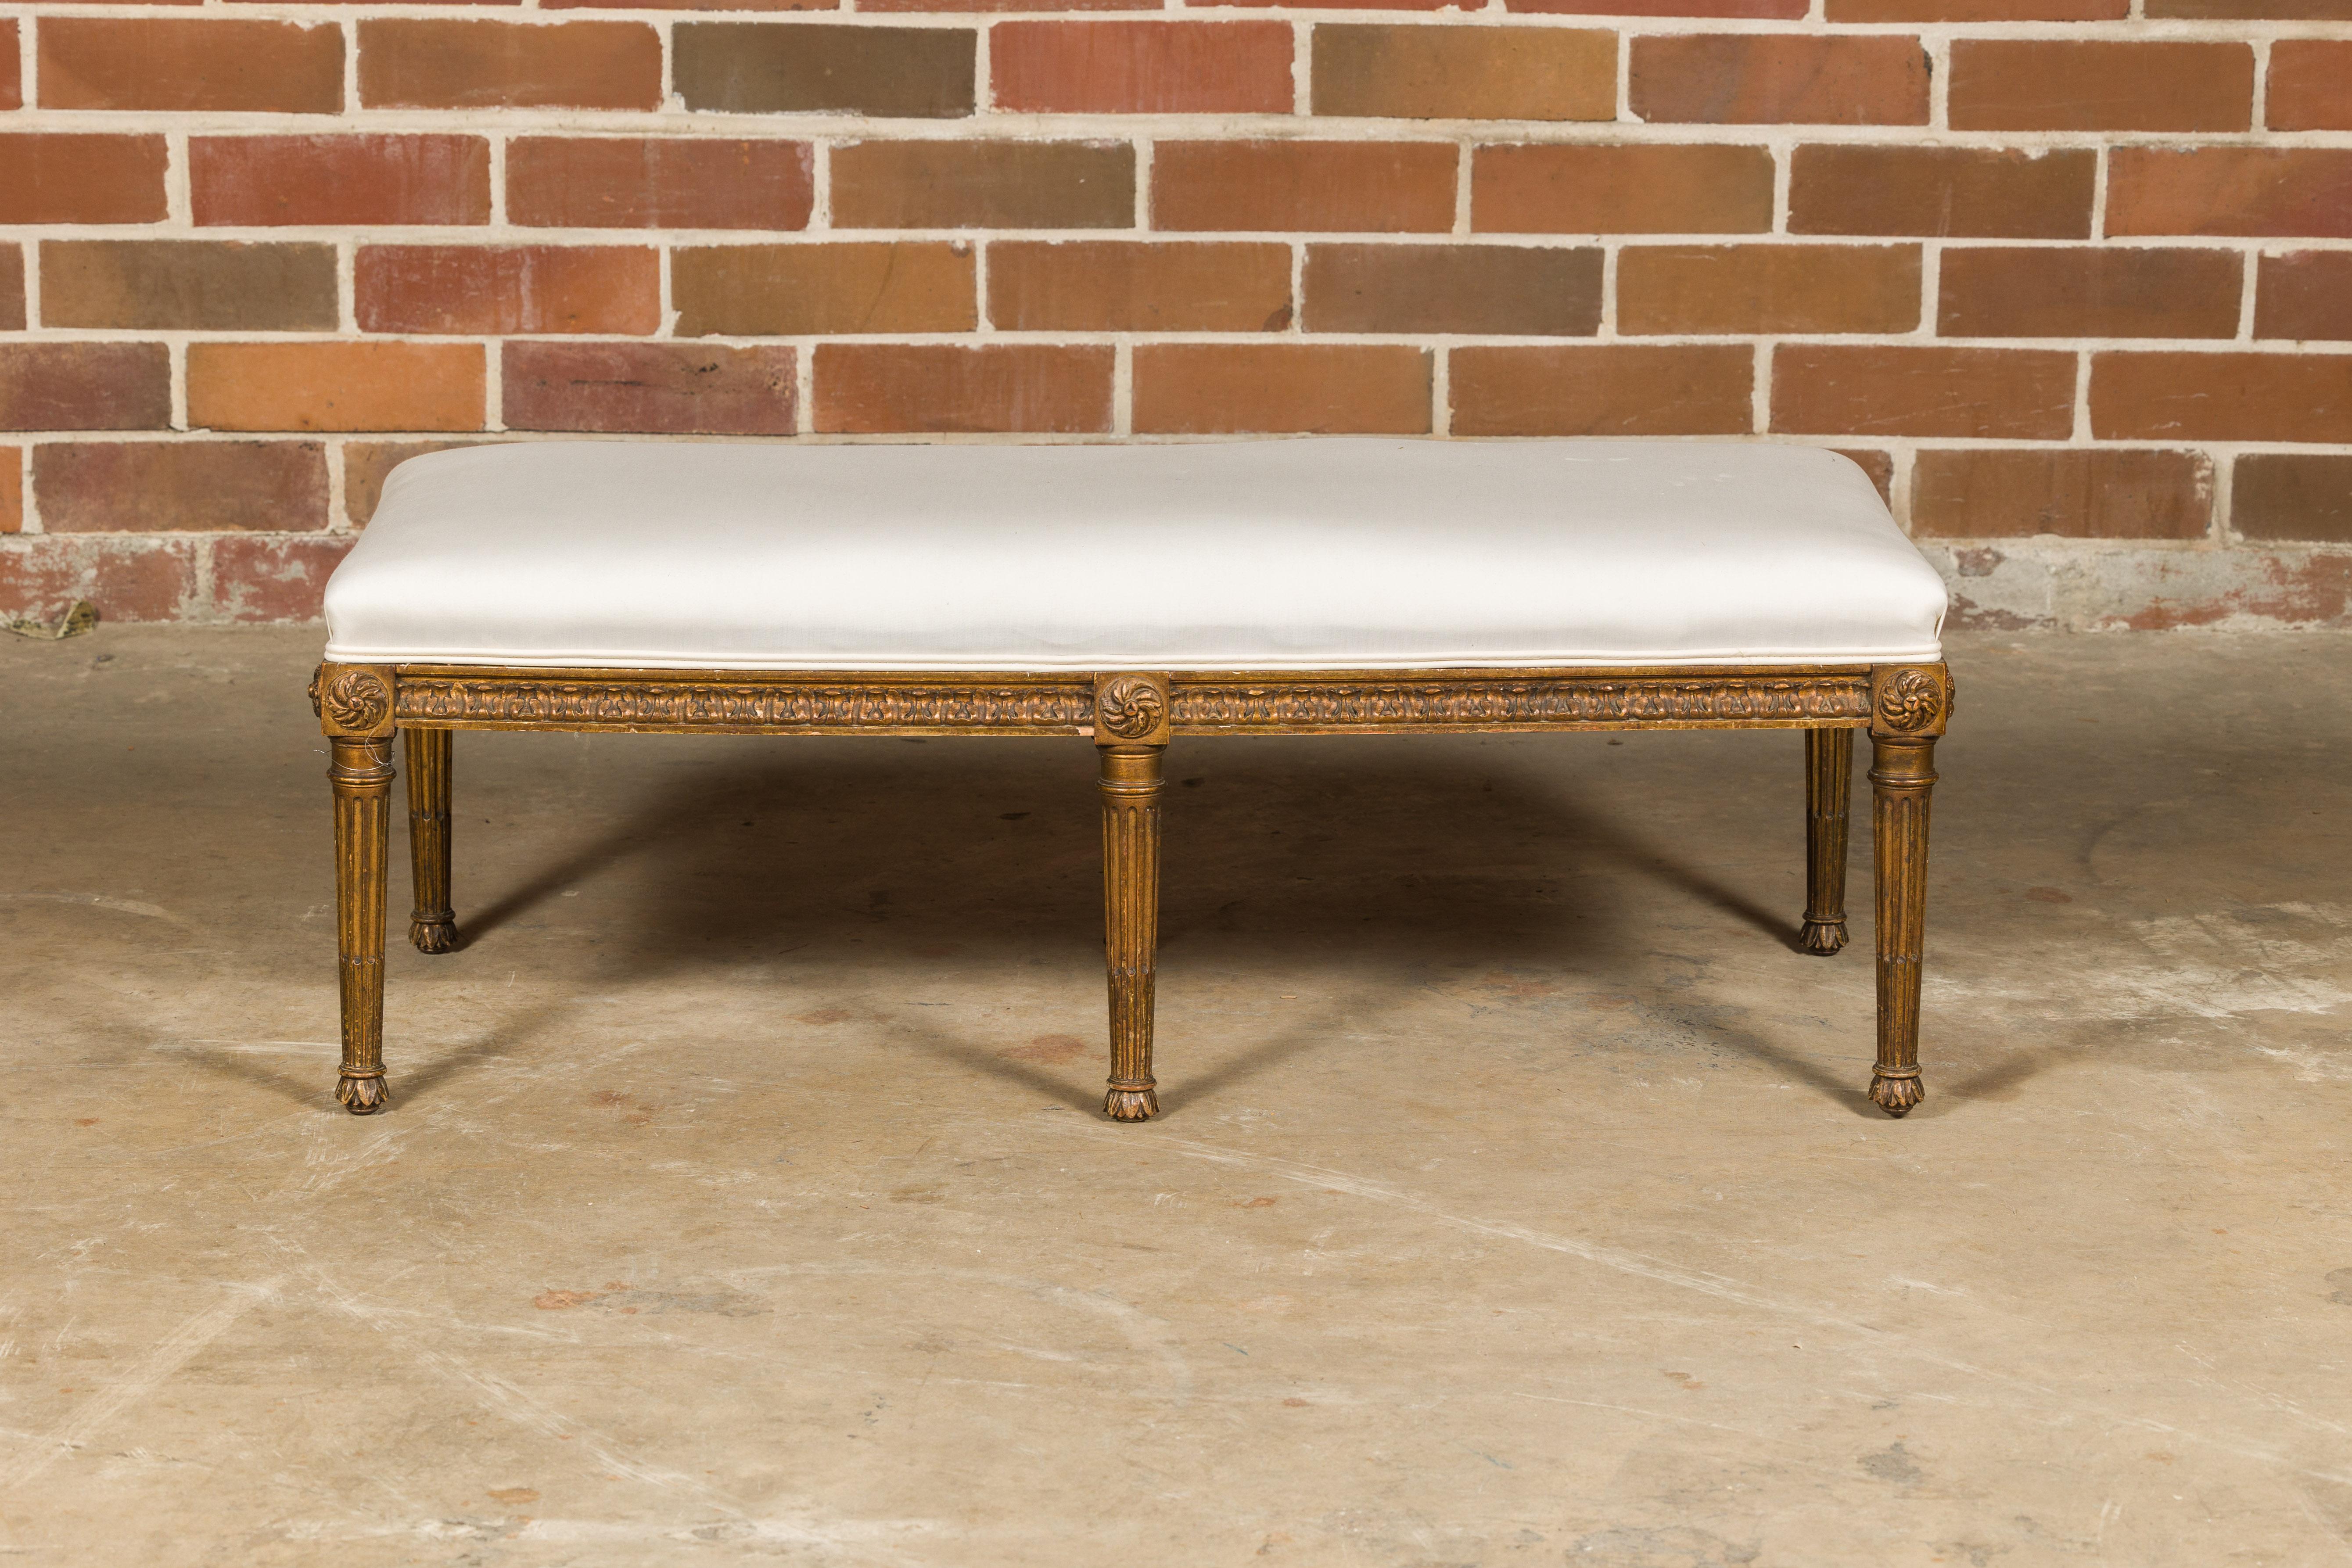 A French Neoclassical style gilded wood bench from circa 1920 with carved frieze, rosettes, fluted legs and custom muslin upholstery. This French Neoclassical style gilded wood bench, crafted around 1920, is a timeless testament to the elegance and